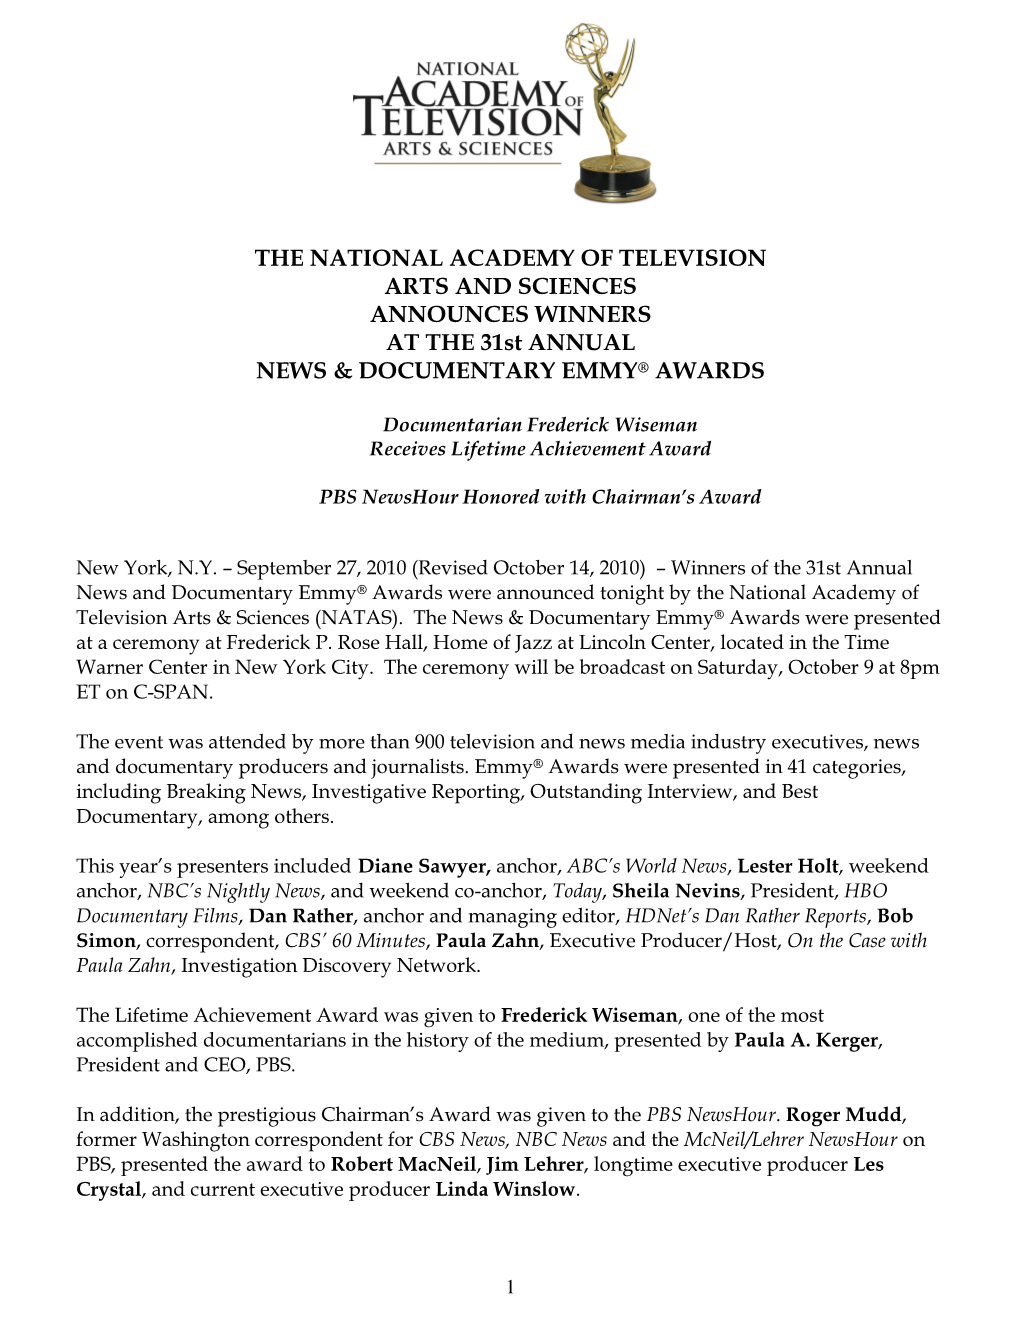 THE NATIONAL ACADEMY of TELEVISION ARTS and SCIENCES ANNOUNCES WINNERS at the 31St ANNUAL NEWS & DOCUMENTARY EMMY ® AWARDS